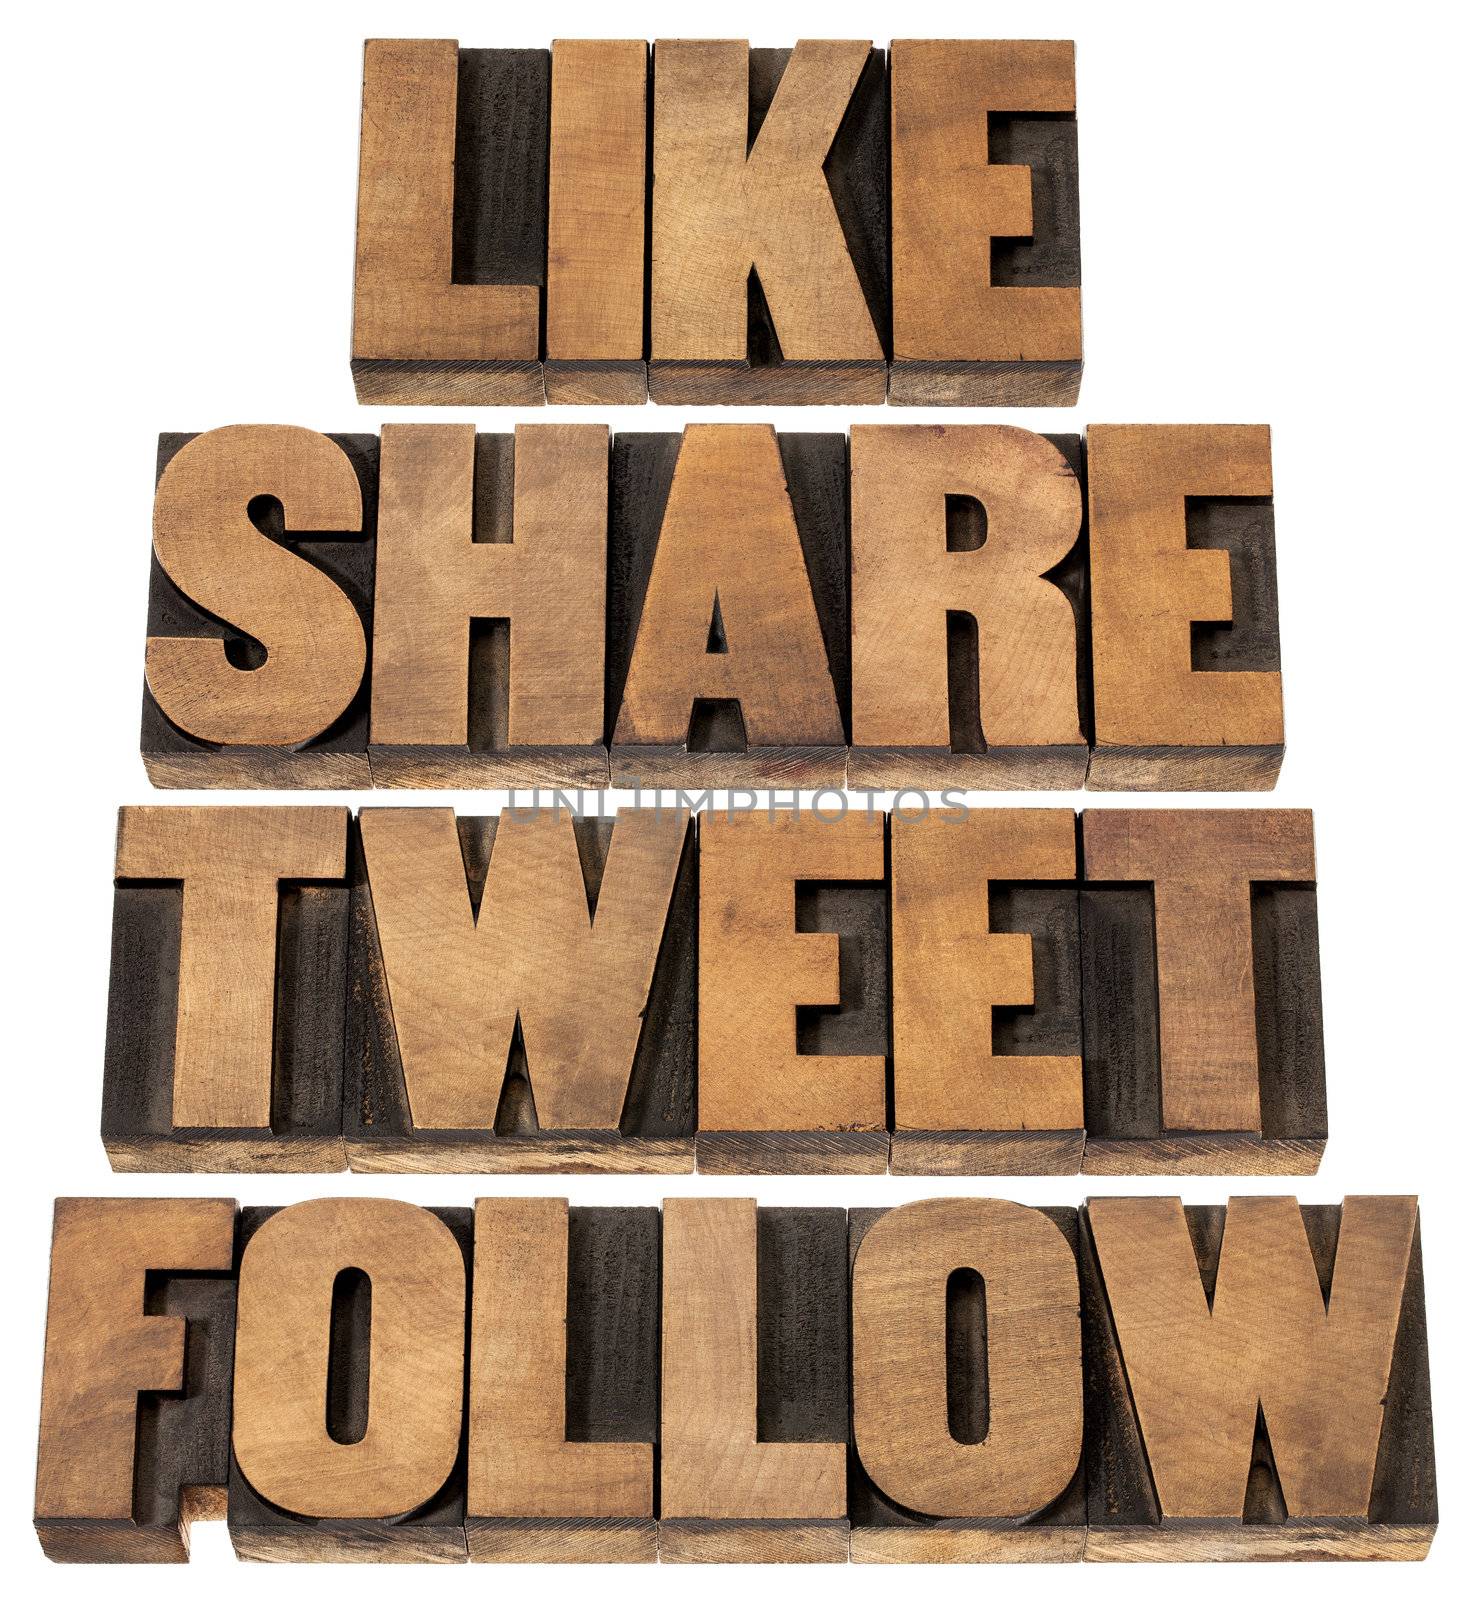 like, share, tweet, follow words - social media concept - isolated text in vintage letterpress wood type printing blocks